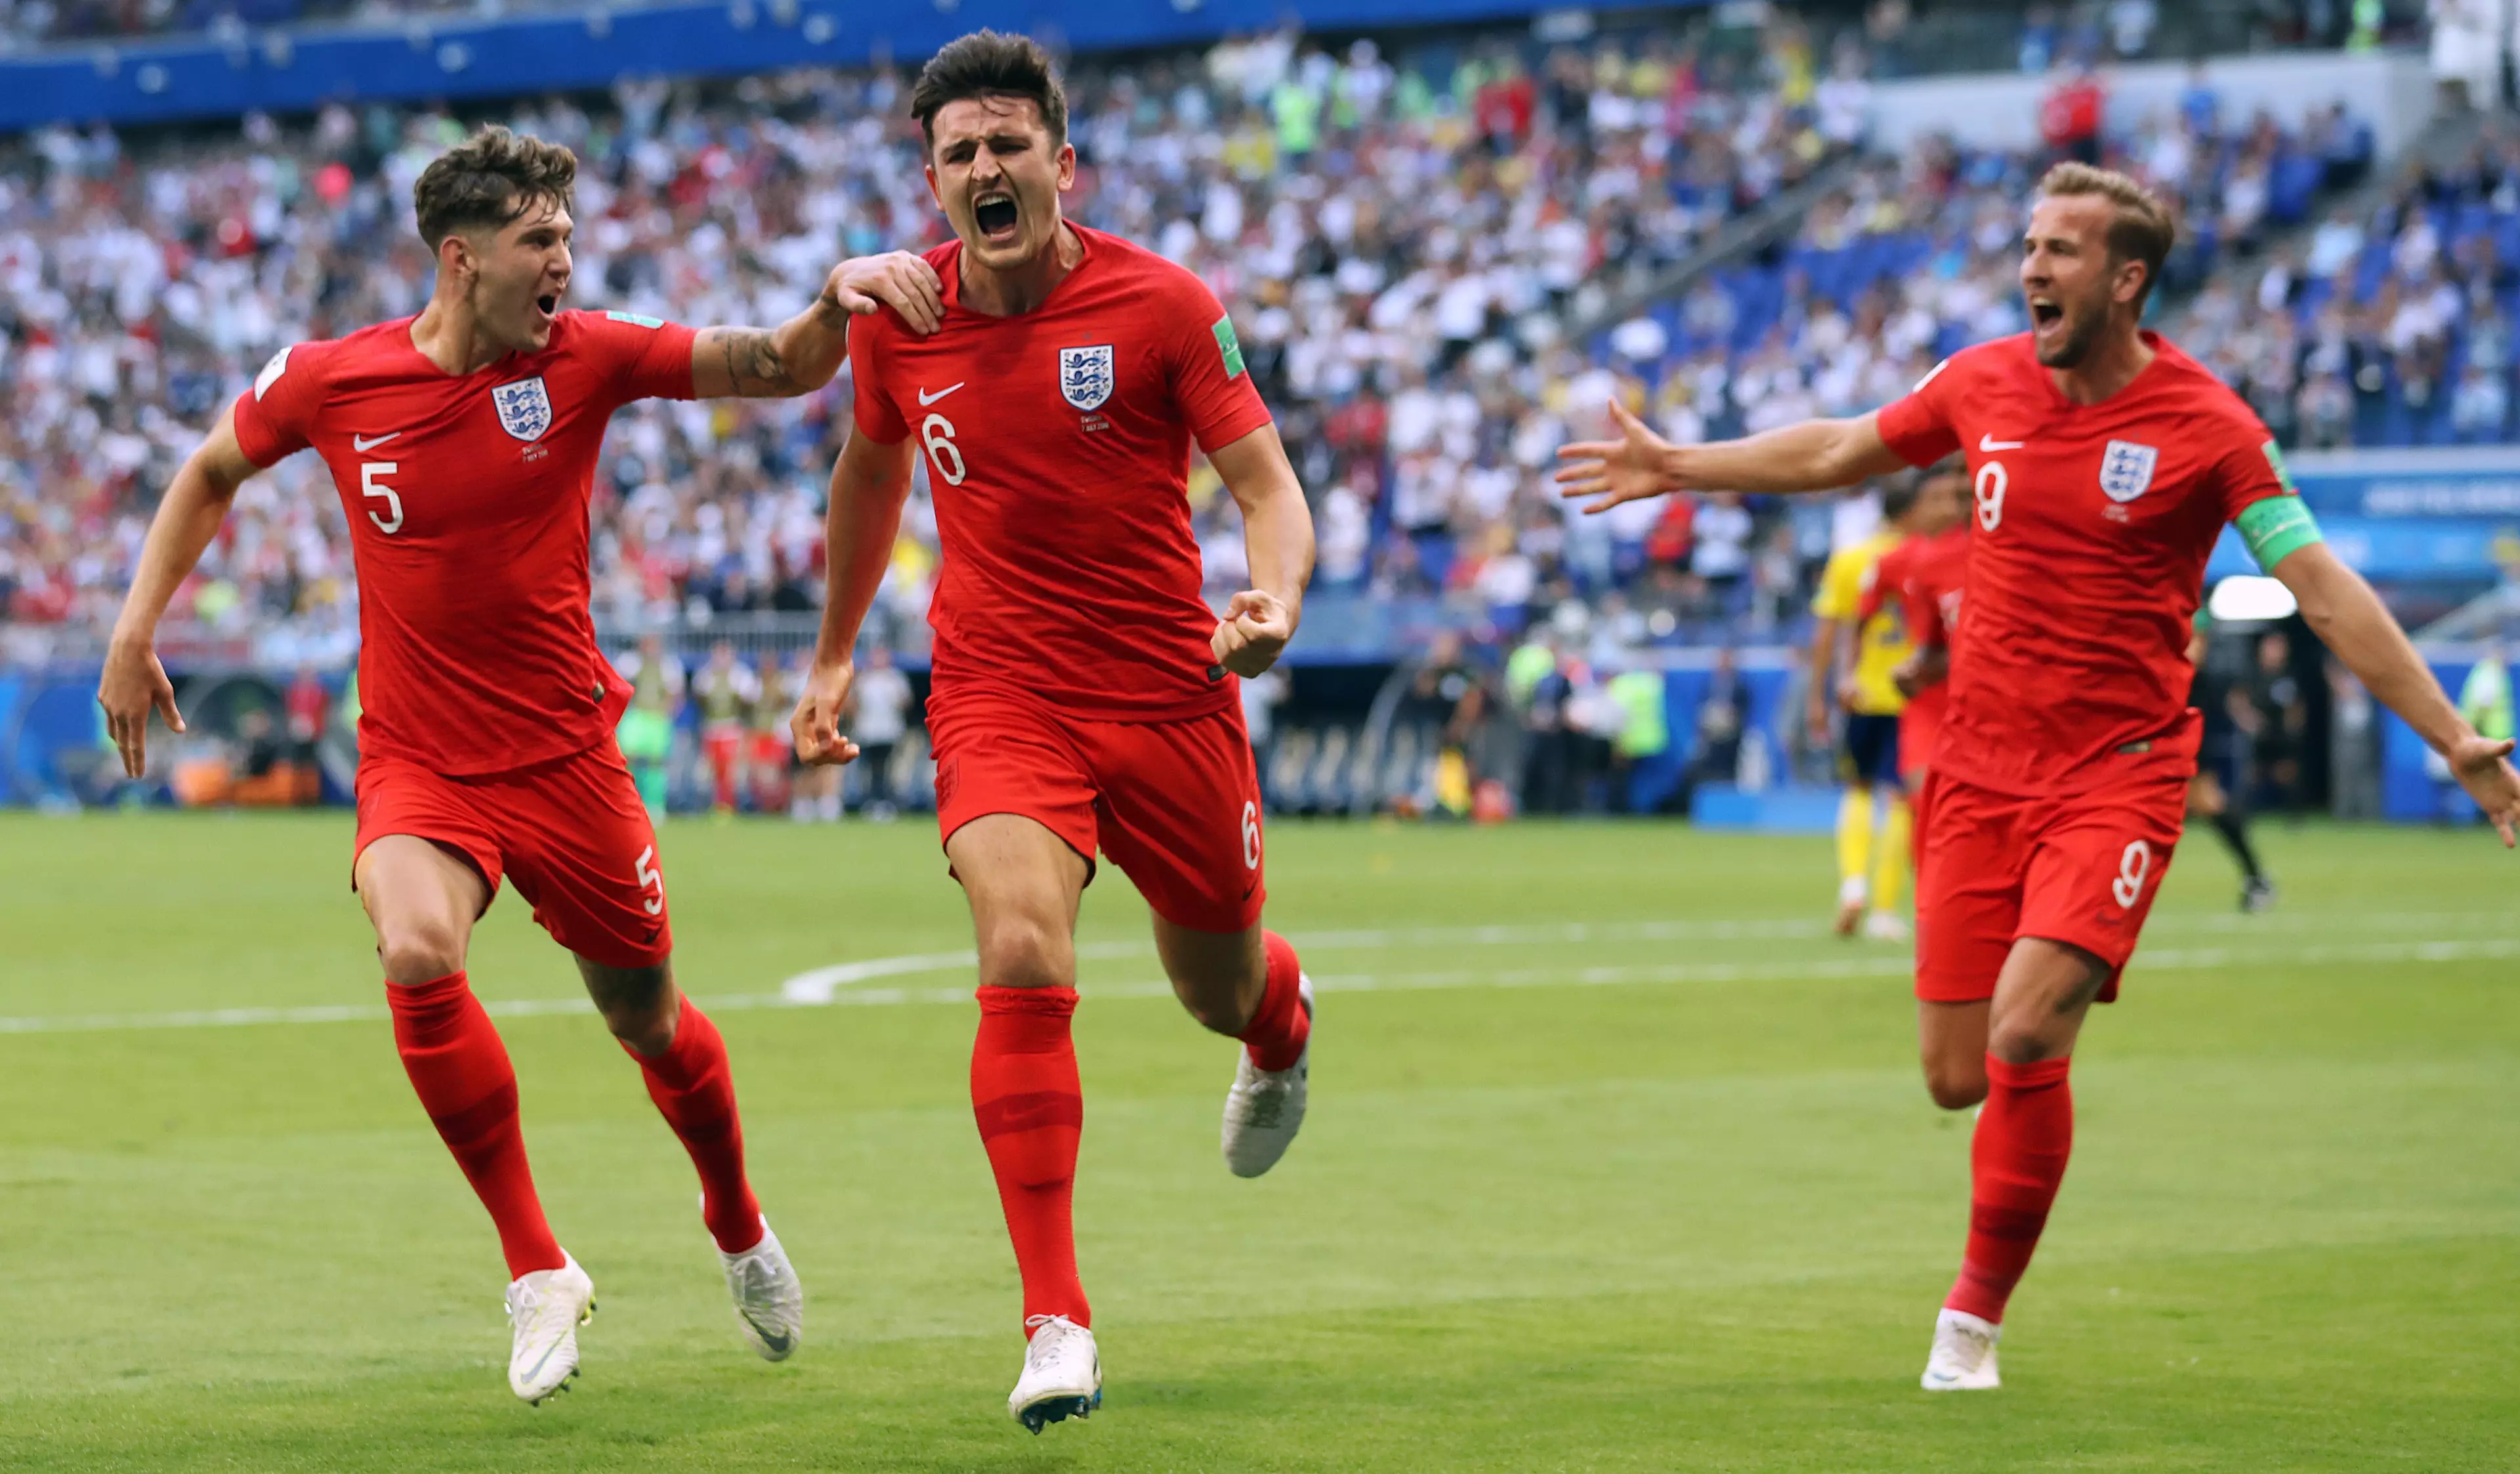 Maguire celebrating his goal in the World Cup quarter final. Image: PA Images